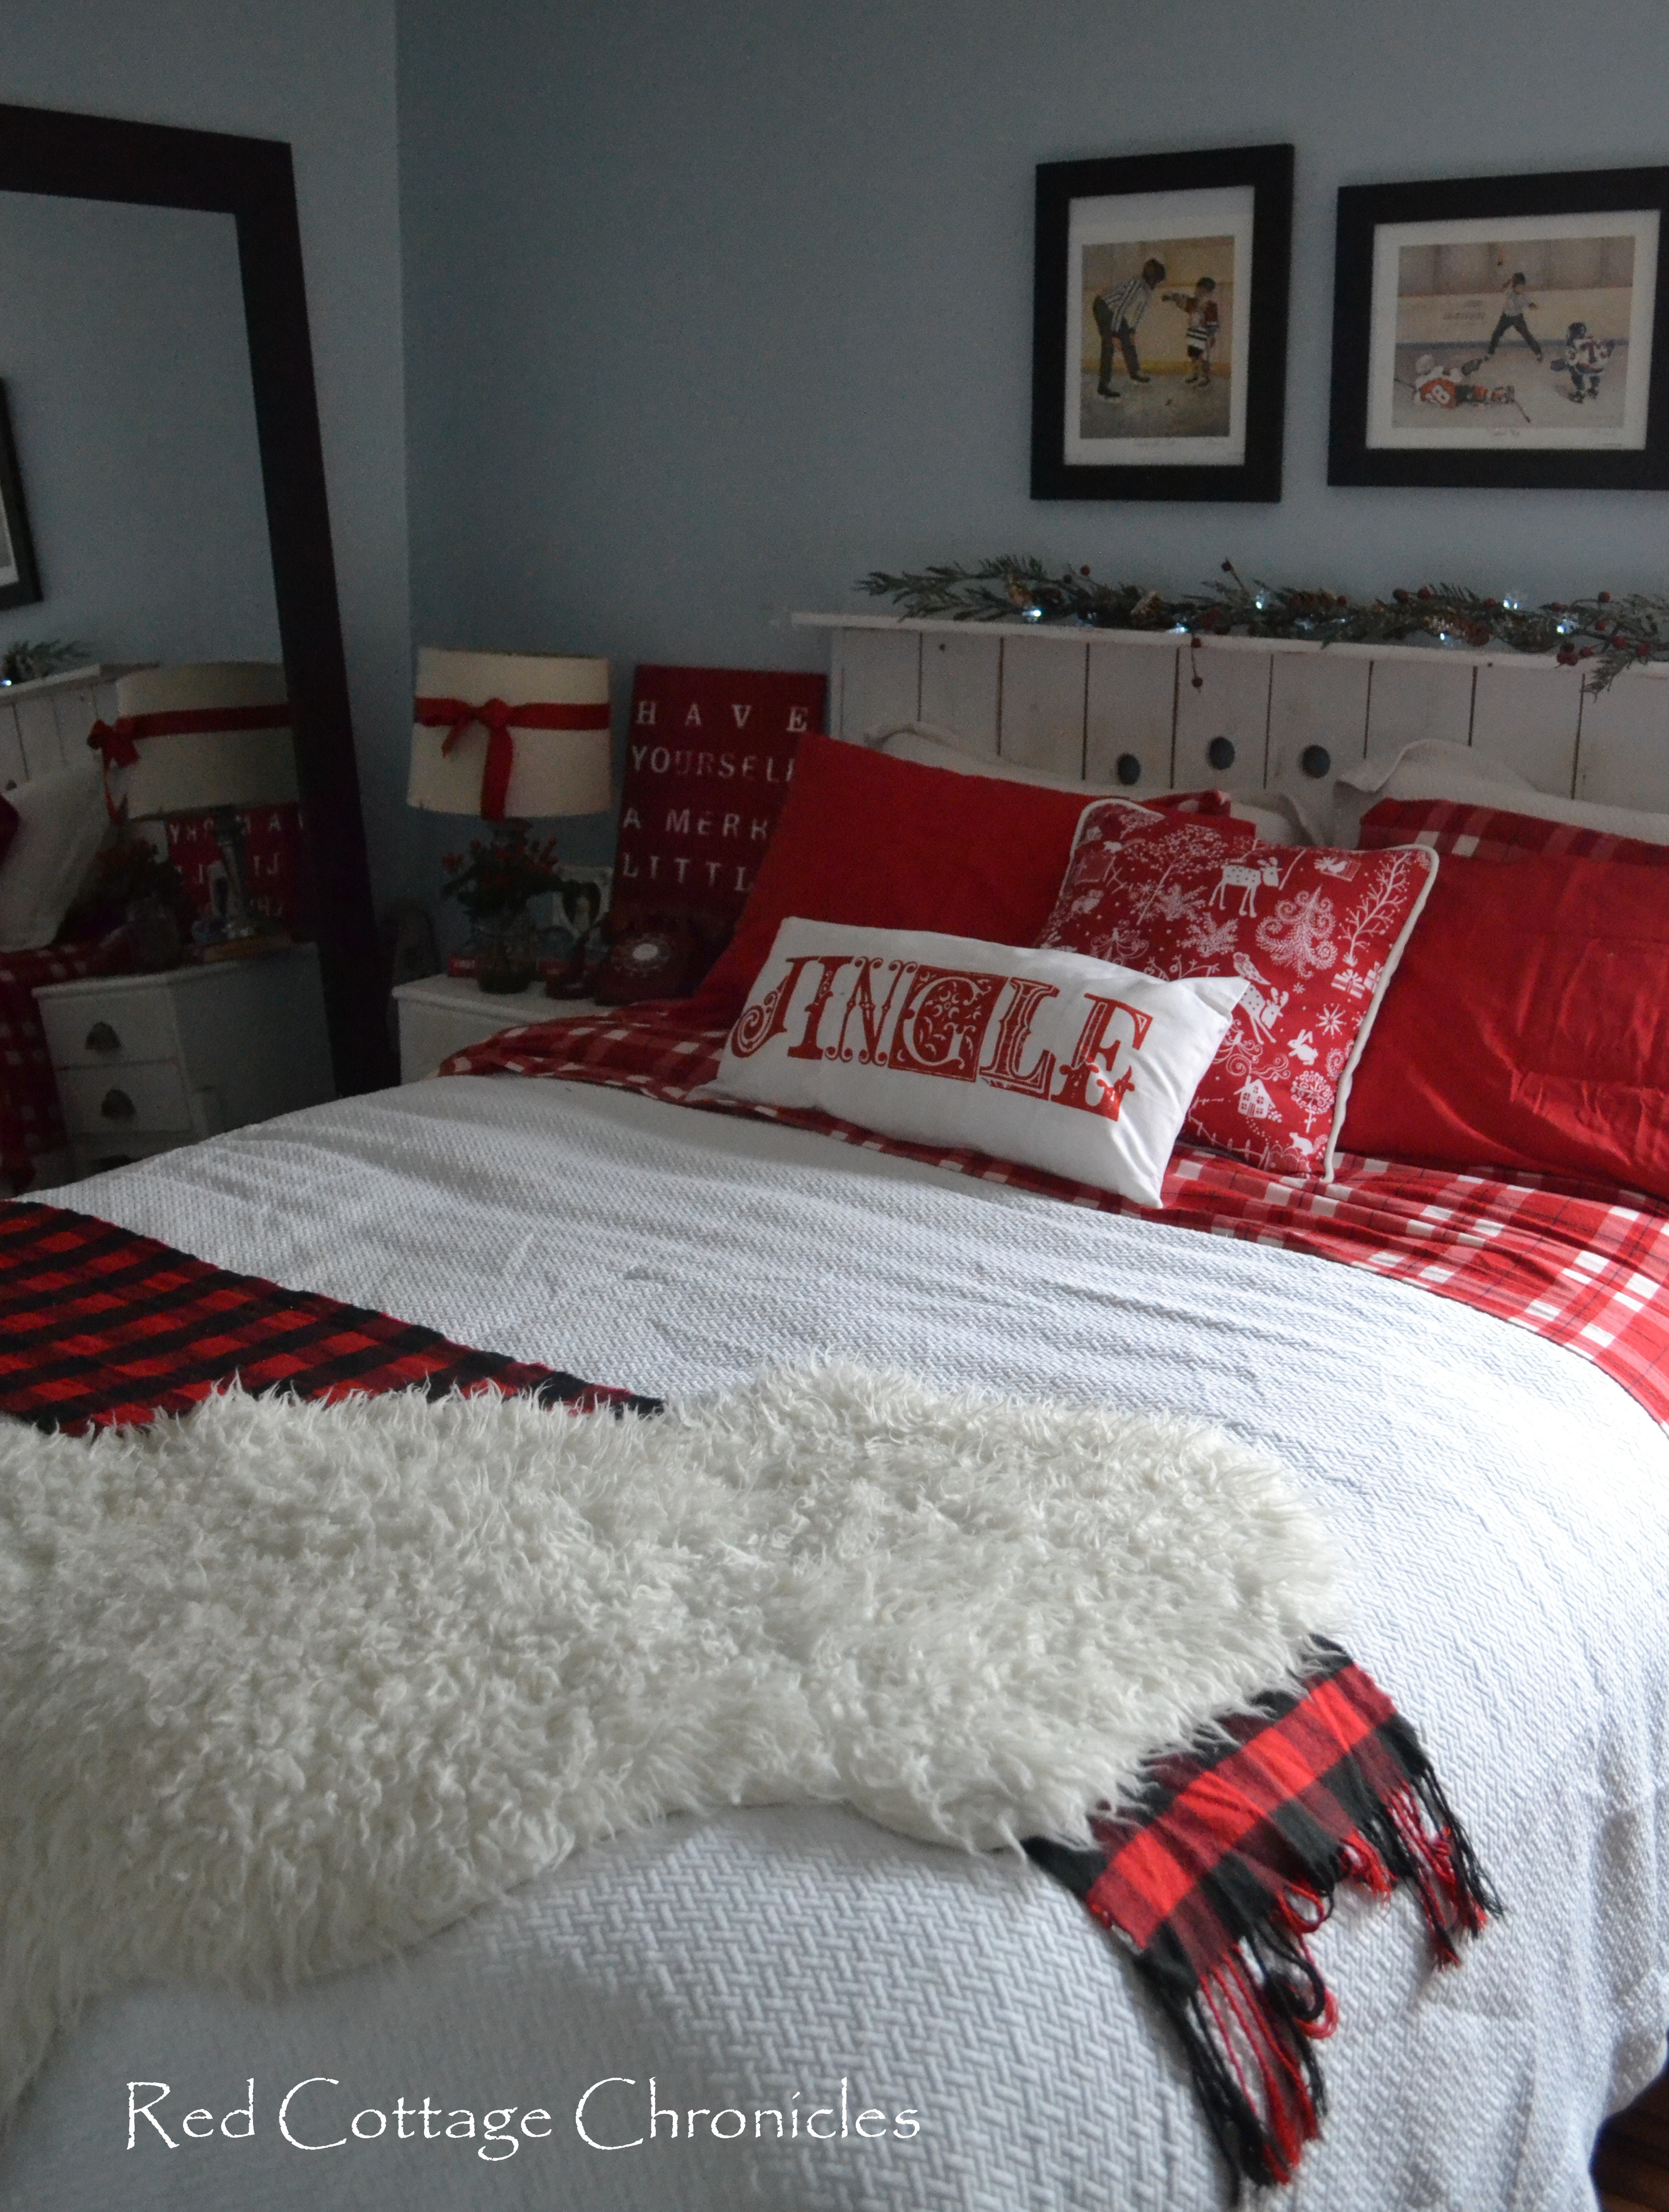 Christmas Bedroom Decoration
 Our Christmas Bedroom Red Cottage Chronicles